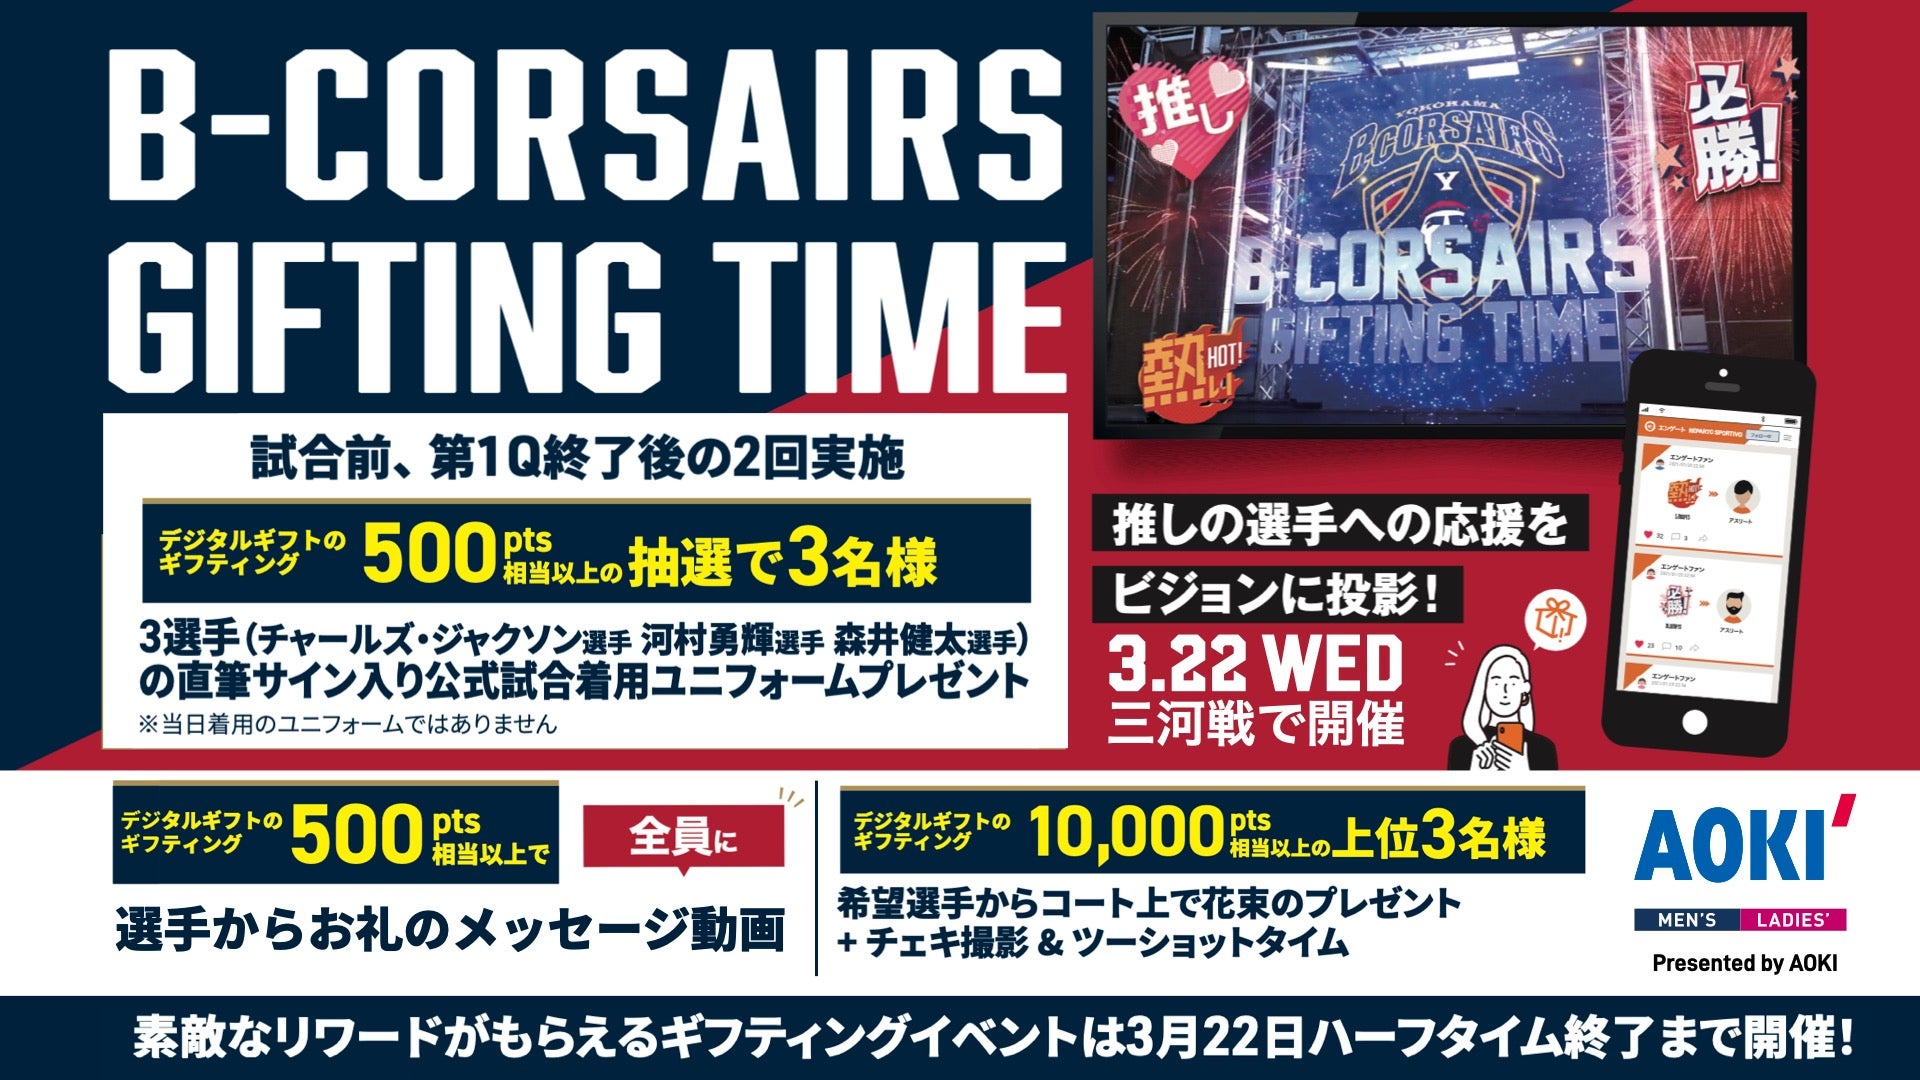 「Engate Gifting Time」Presented by AOKI